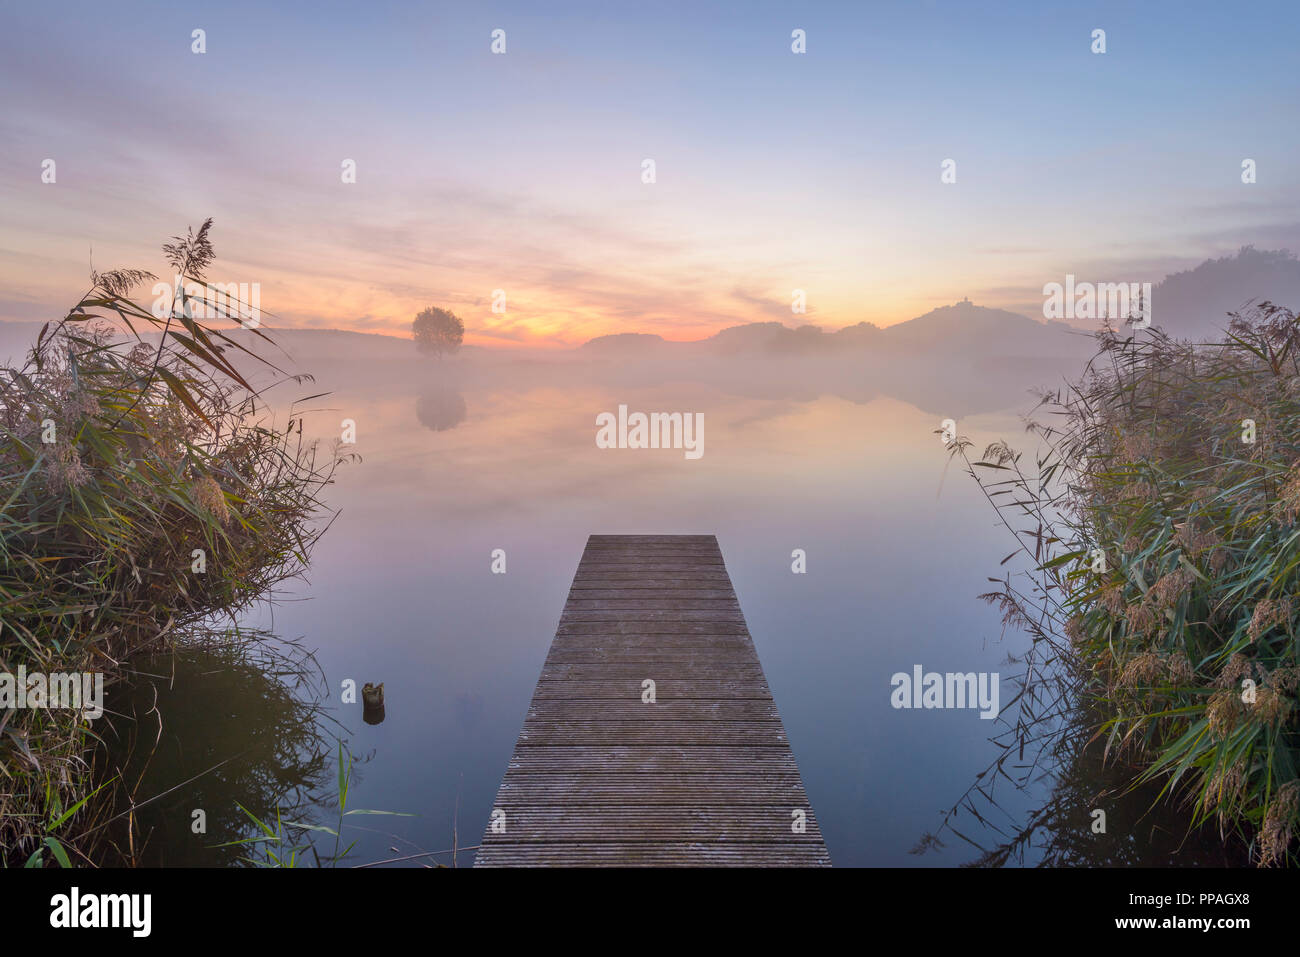 Wooden Jetty with Reflective Sky in Lake at Dawn, Drei Gleichen, Ilm District, Thuringia, Germany Stock Photo